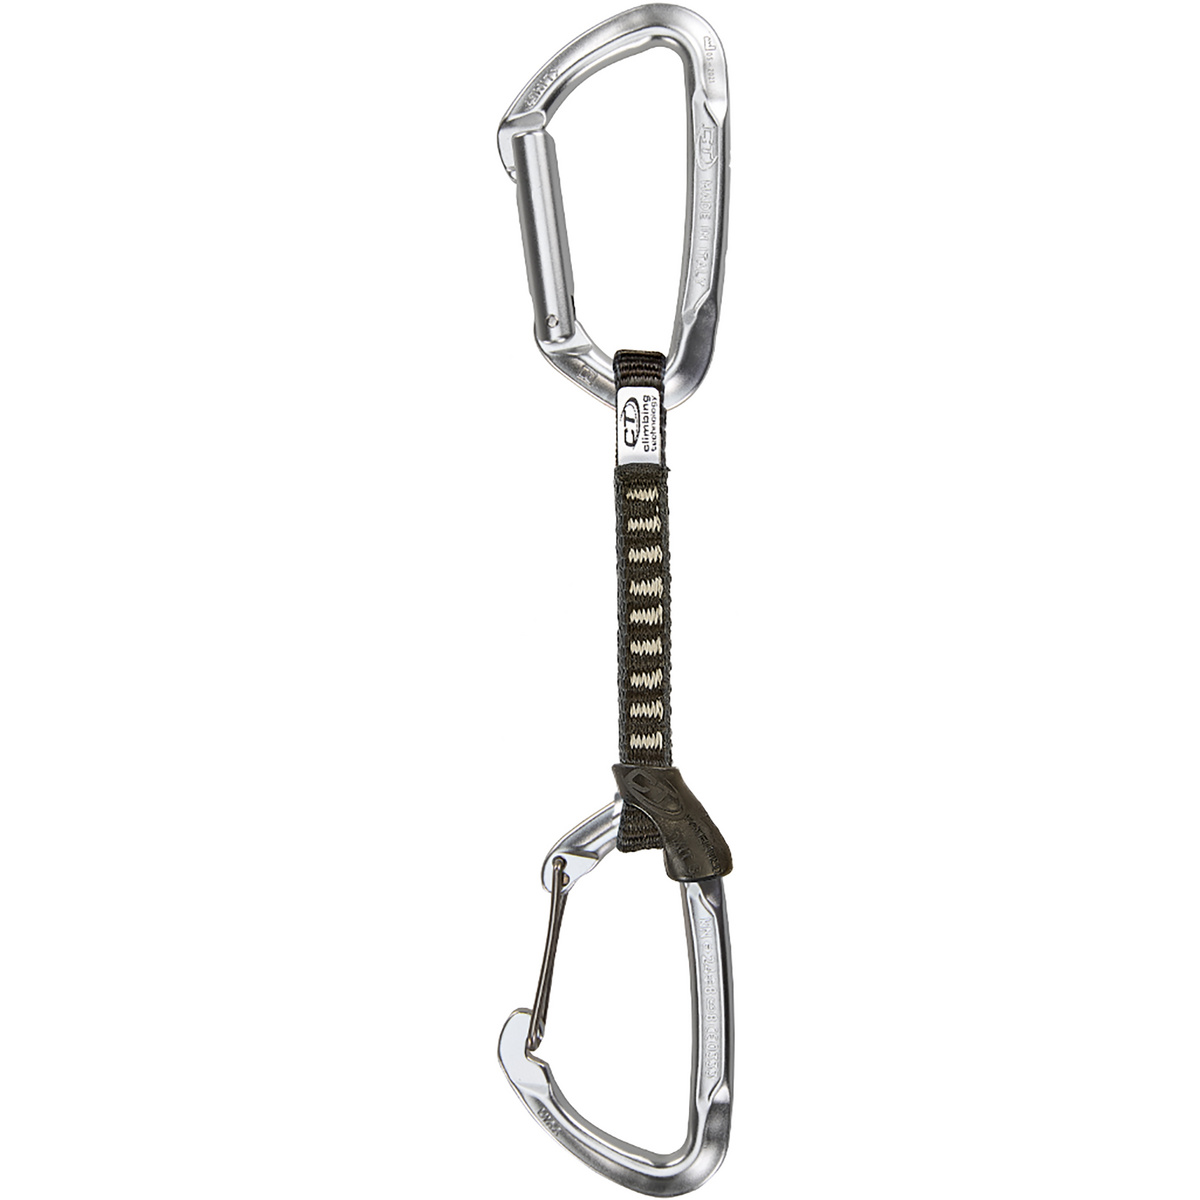 Image of Climbing Technology Rinvii Lime M-UL Expressset